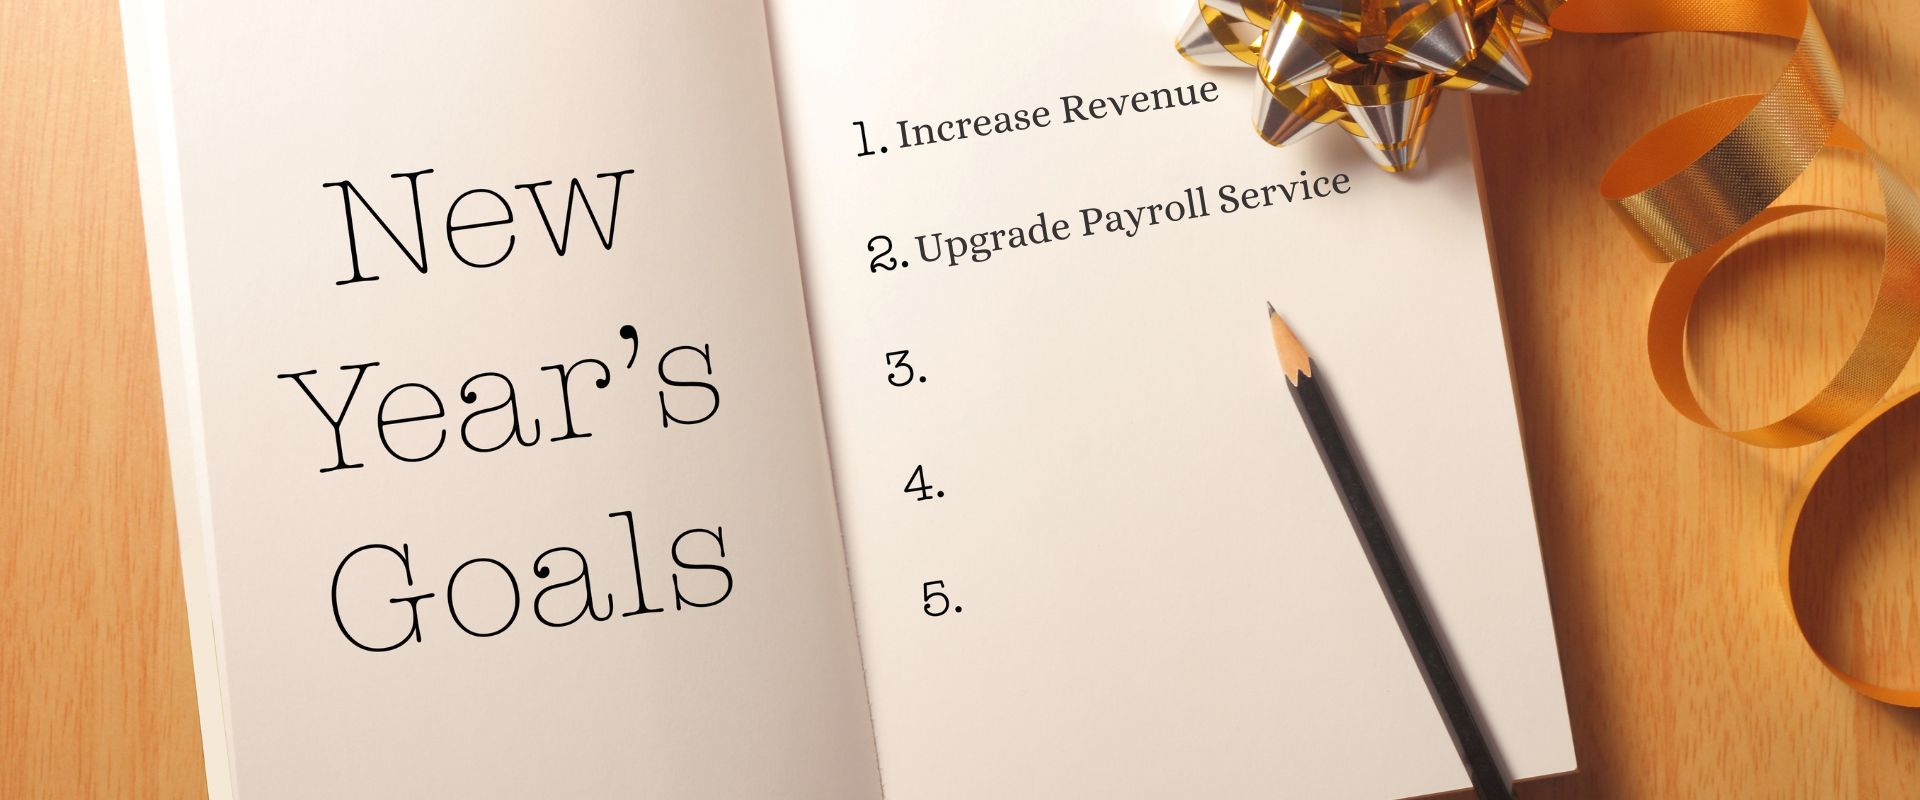 new year new payroll solution